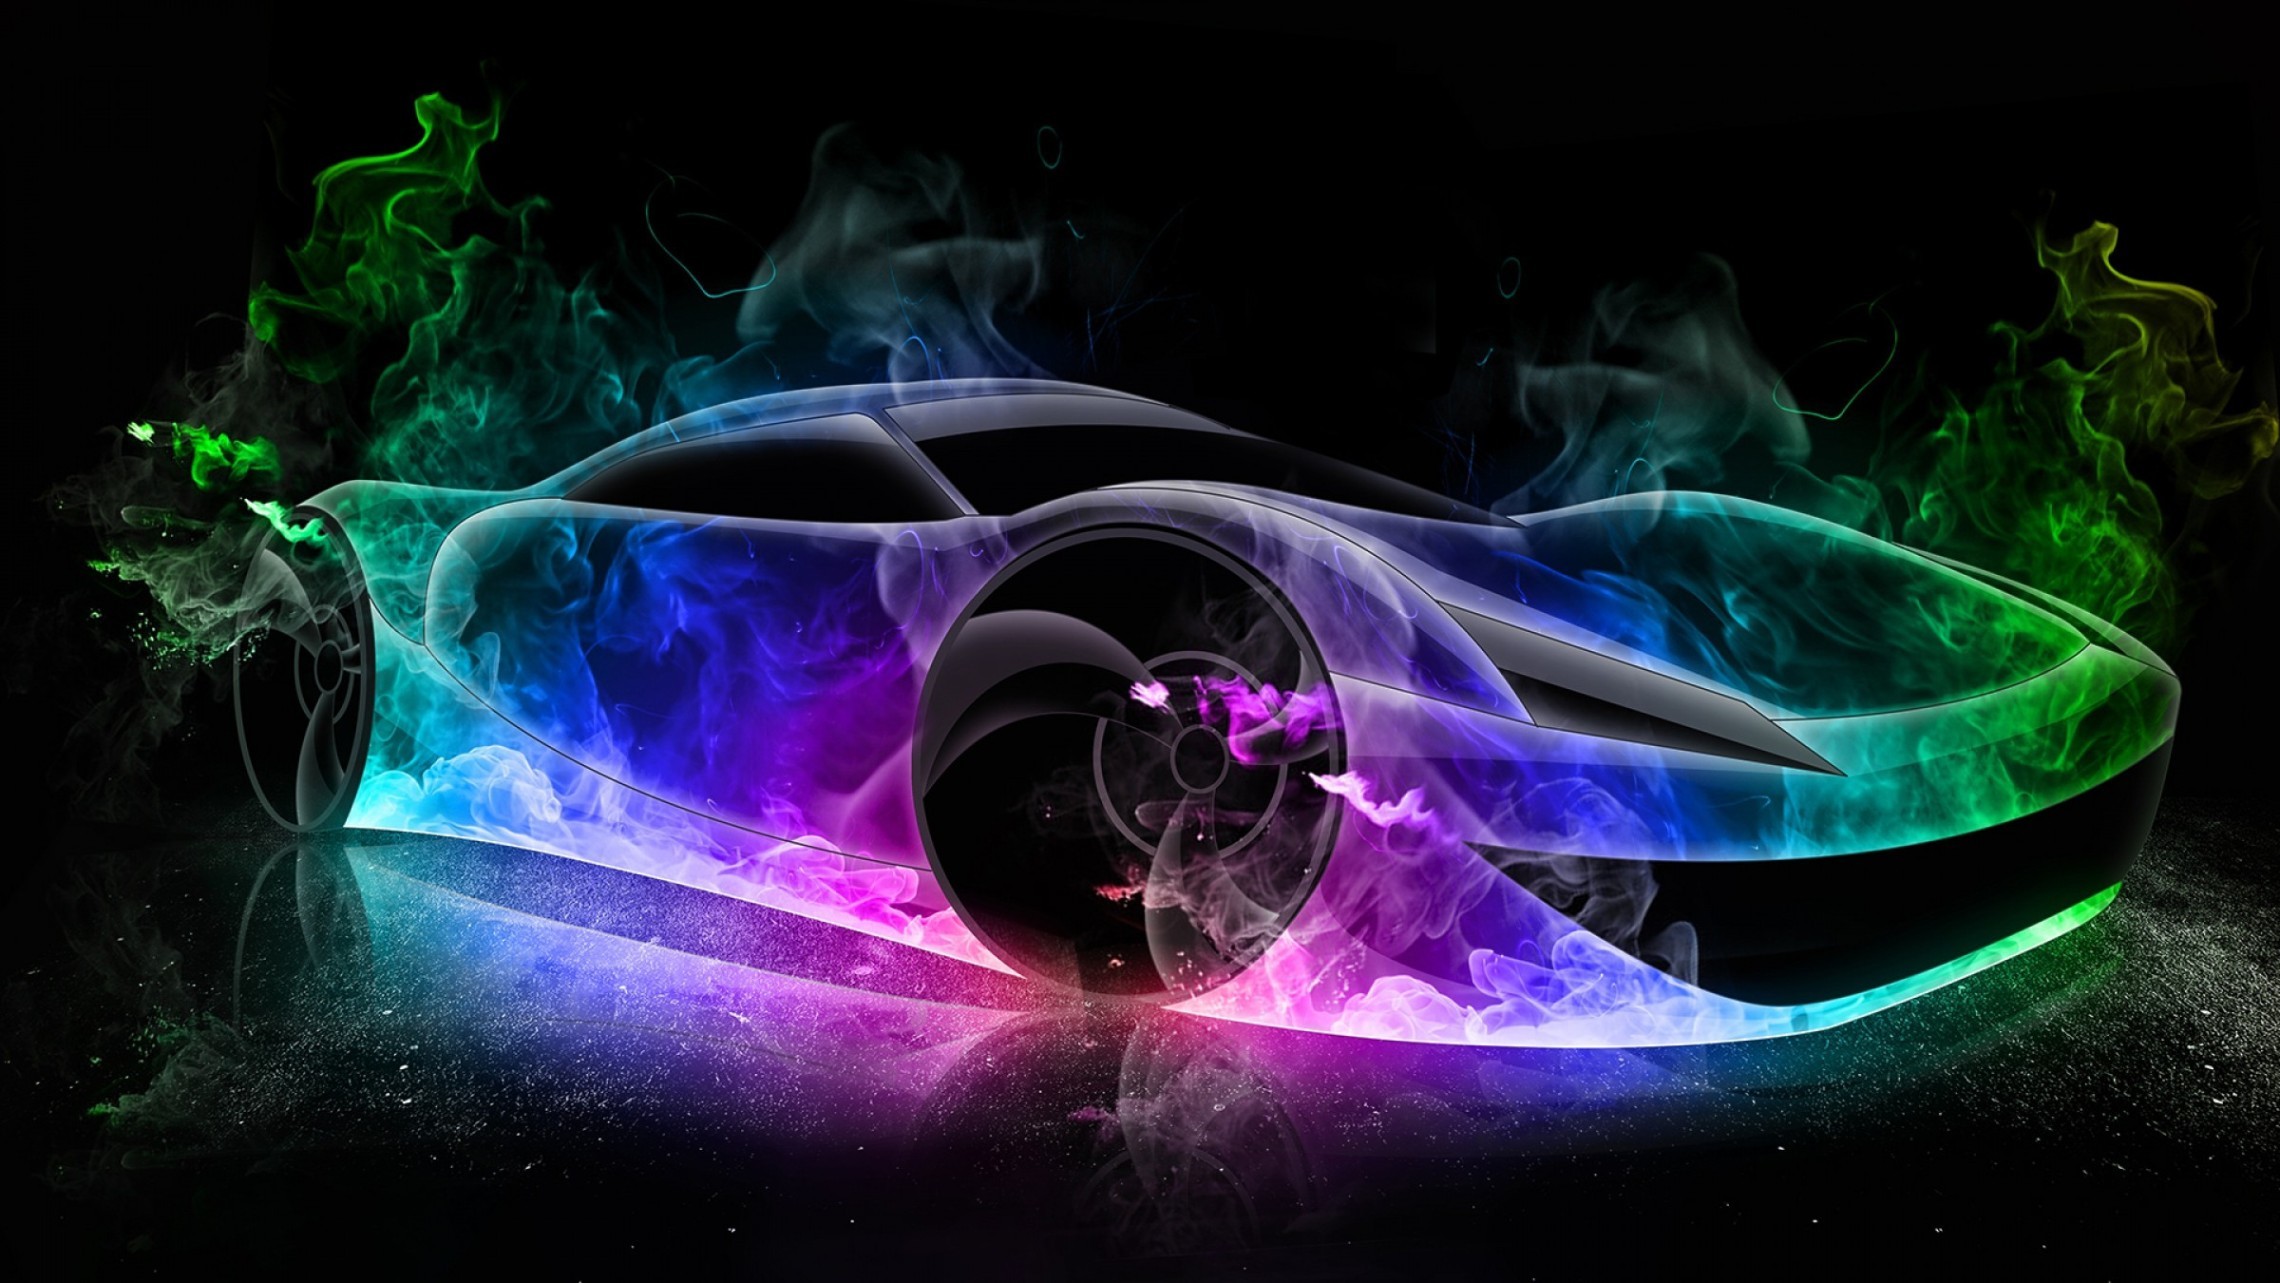 2280x1283 Ultra 3d colorful car high definition wallpapers